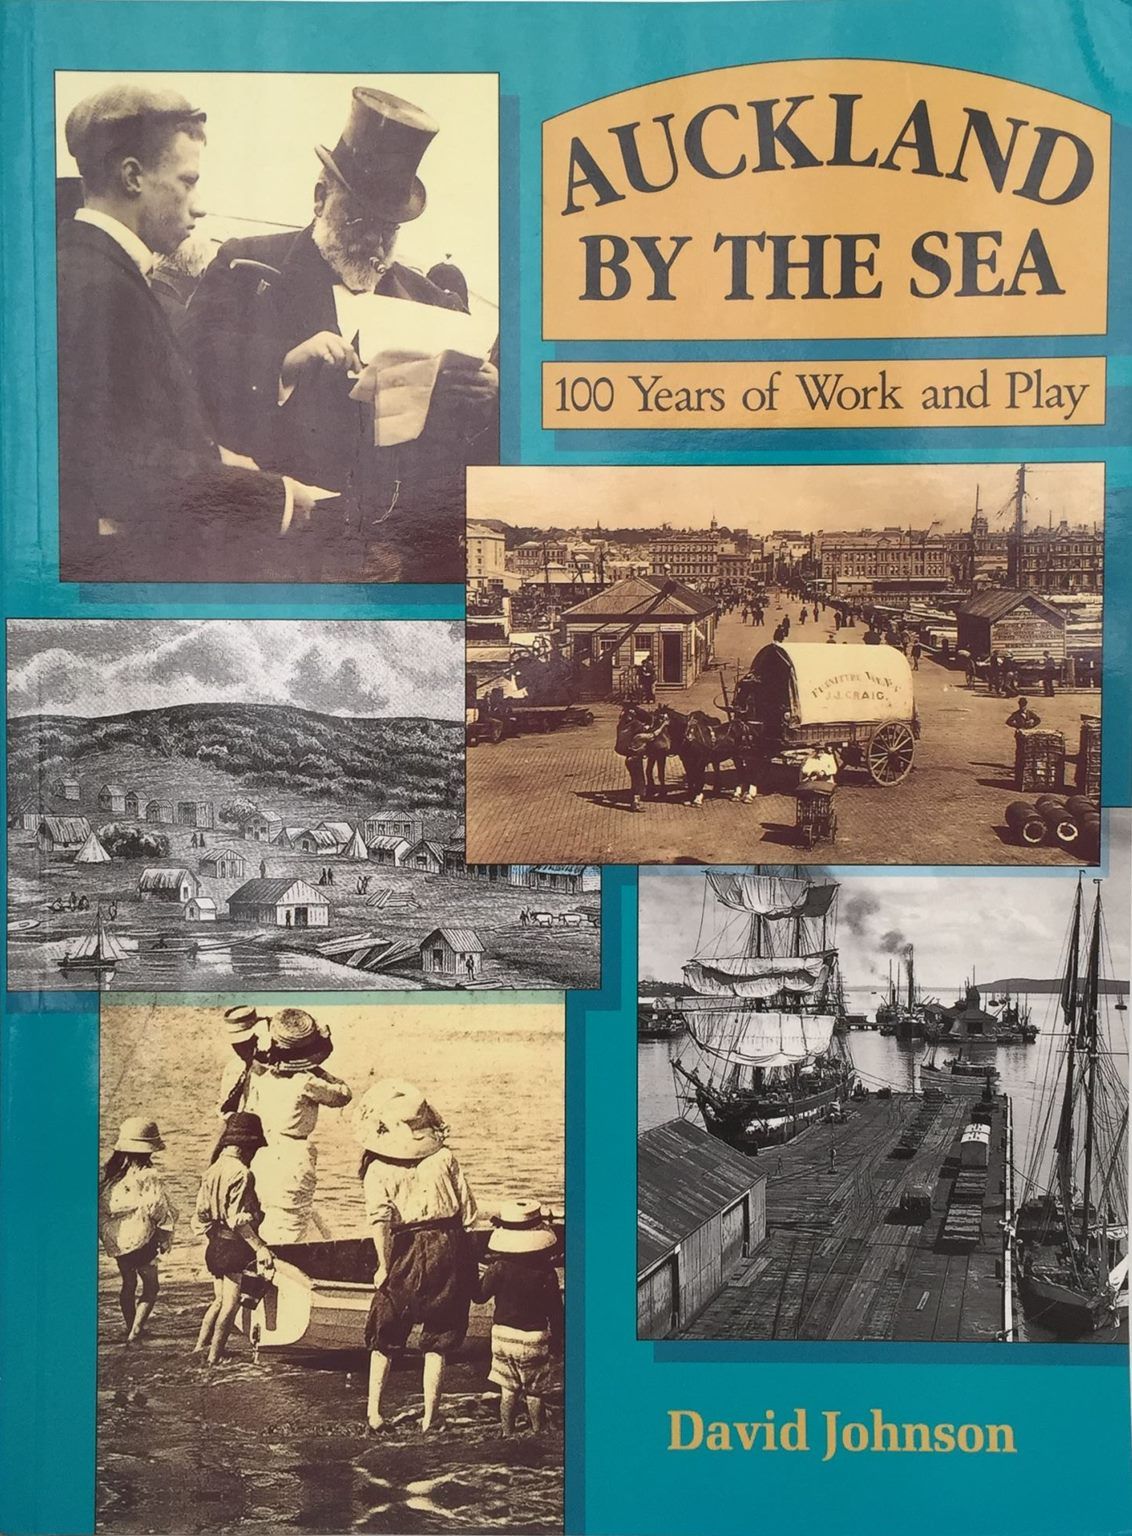 AUCKLAND BY THE SEA: 100 Years of Work and Play